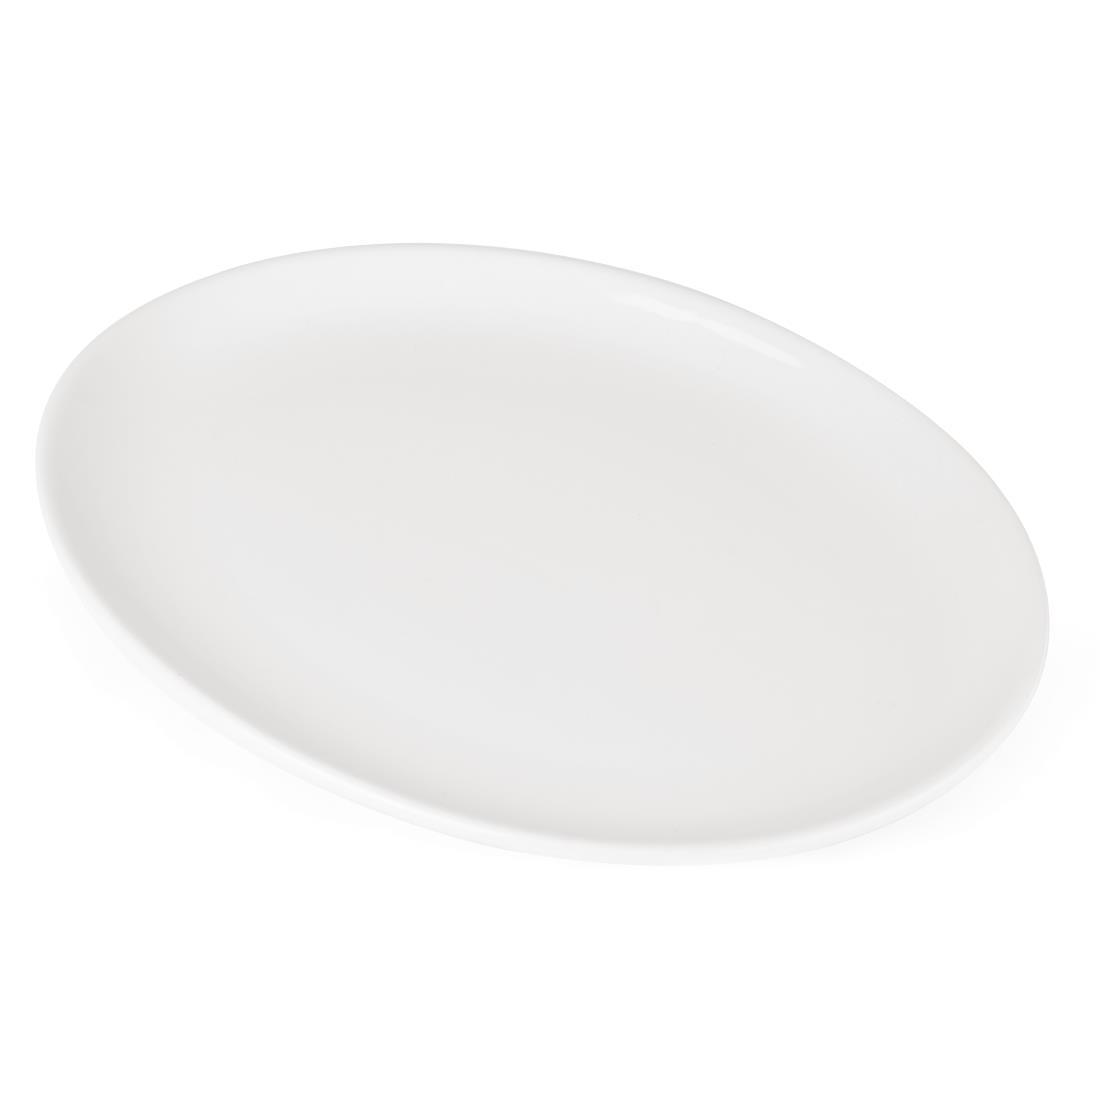 Olympia Athena Oval Coupe Plates 305 x 241 mm (Pack of 6) - CC212  - 5